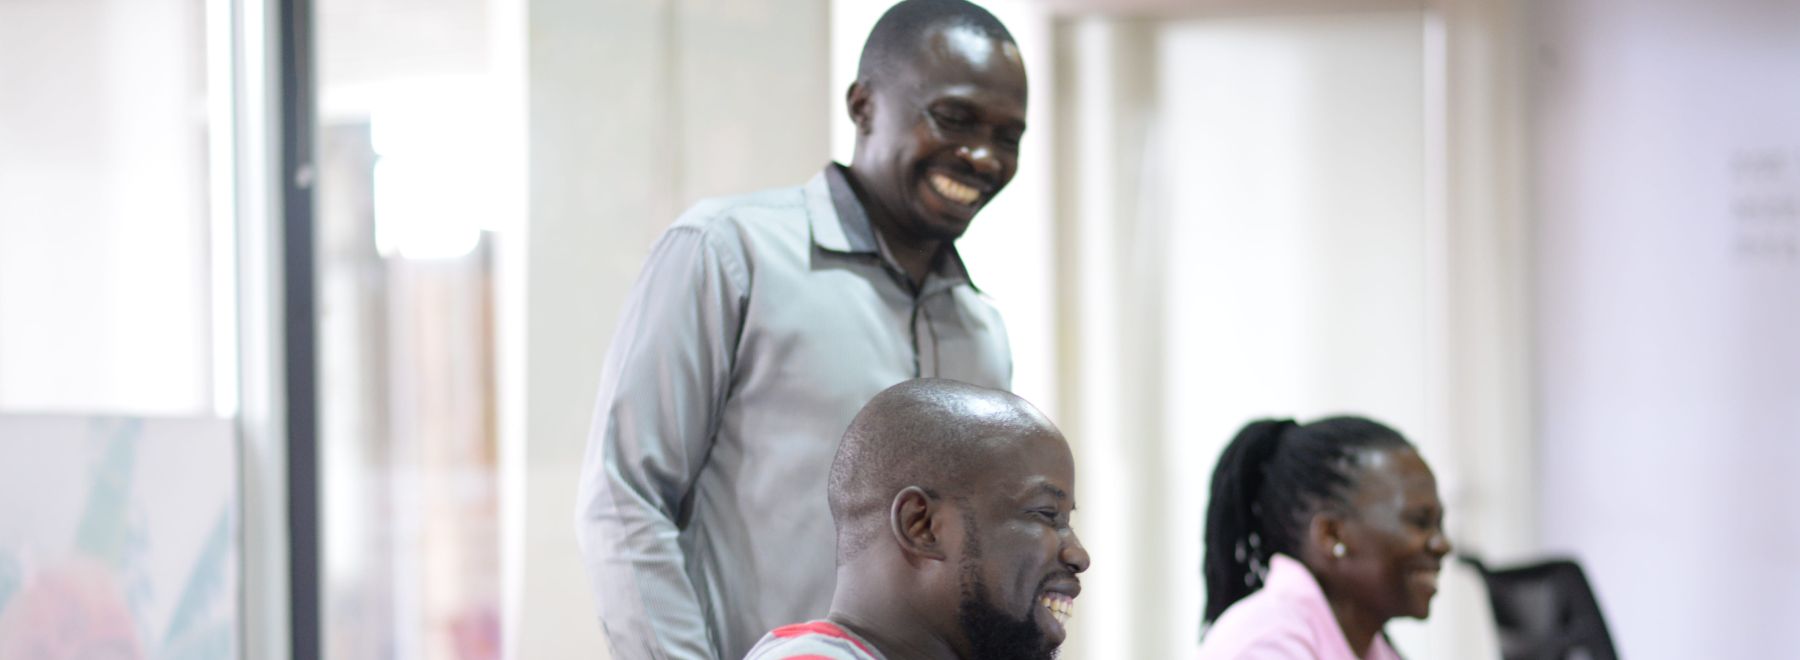 One Acre Fund team members in Uganda laugh together over a laptop screen